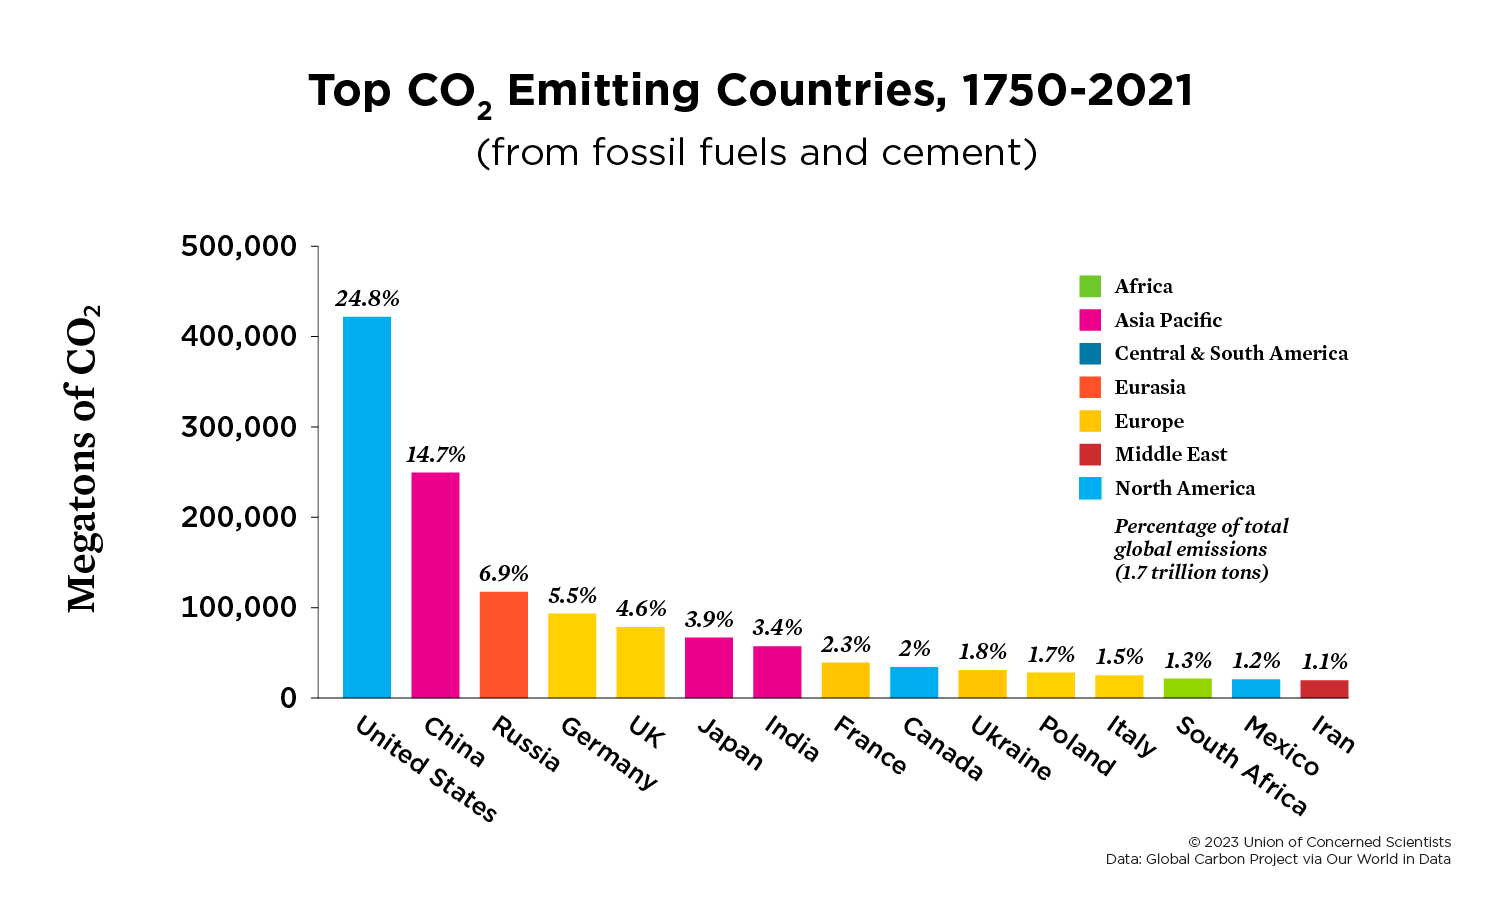 Each Country's Share of CO2 Emissions Union of Concerned Scientists